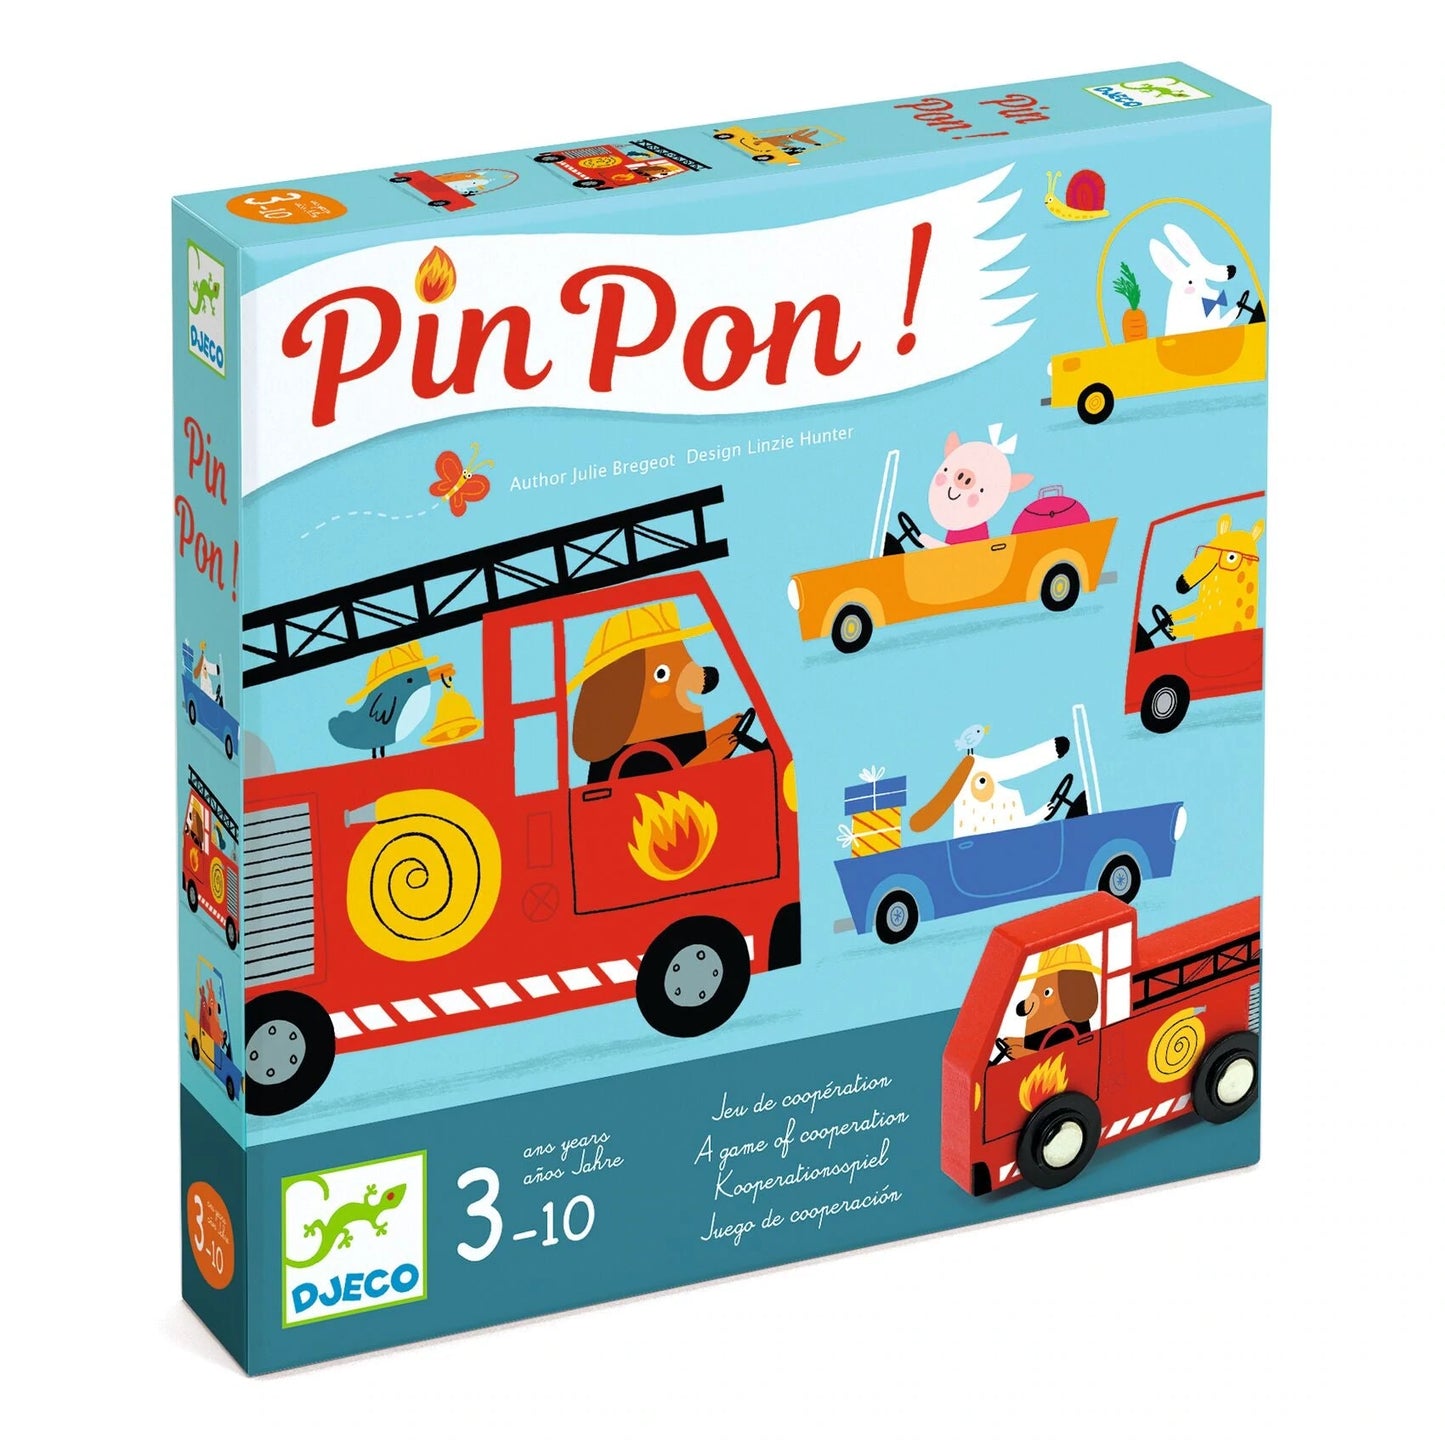 PinPon! Cooperation Skill Building Game